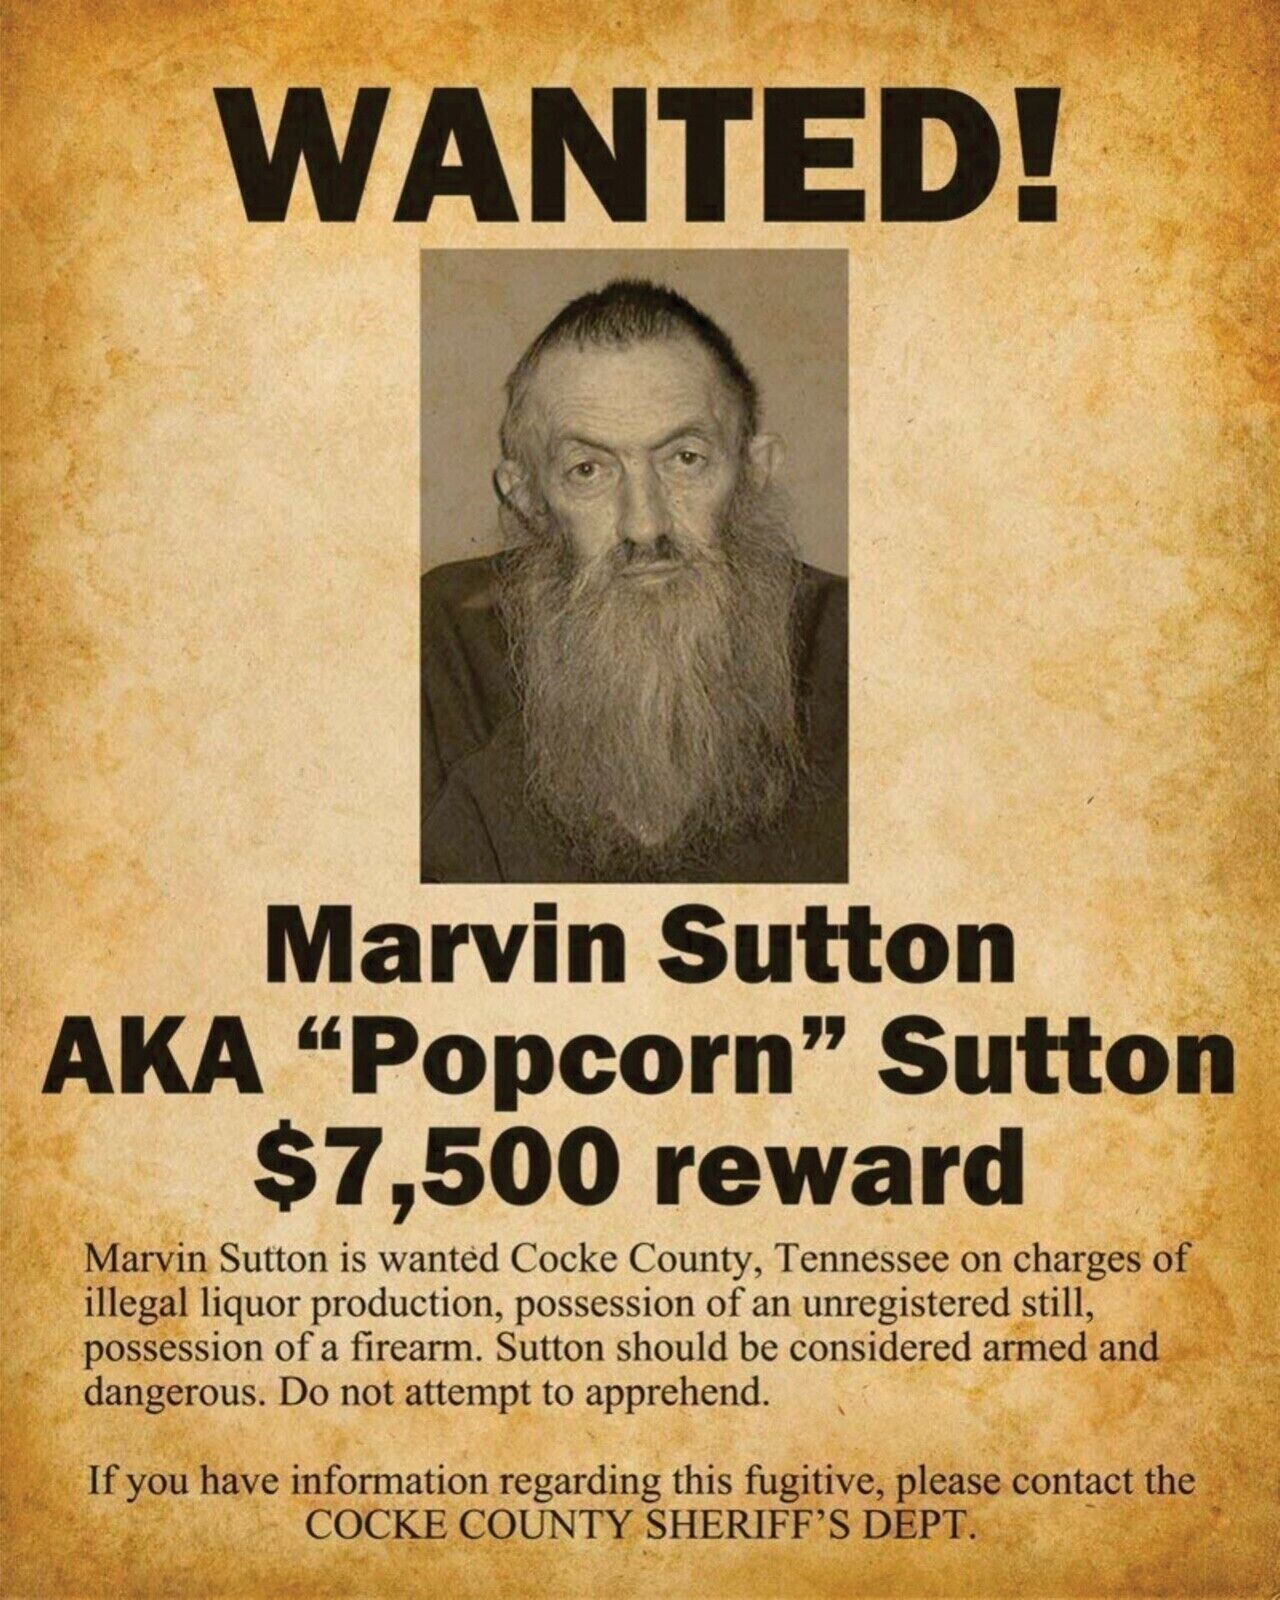 1981 MARVIN POPCORN SUTTON PHOTO 8.5X11 WANTED POSTER JACK DANIELS OF MOONSHINE